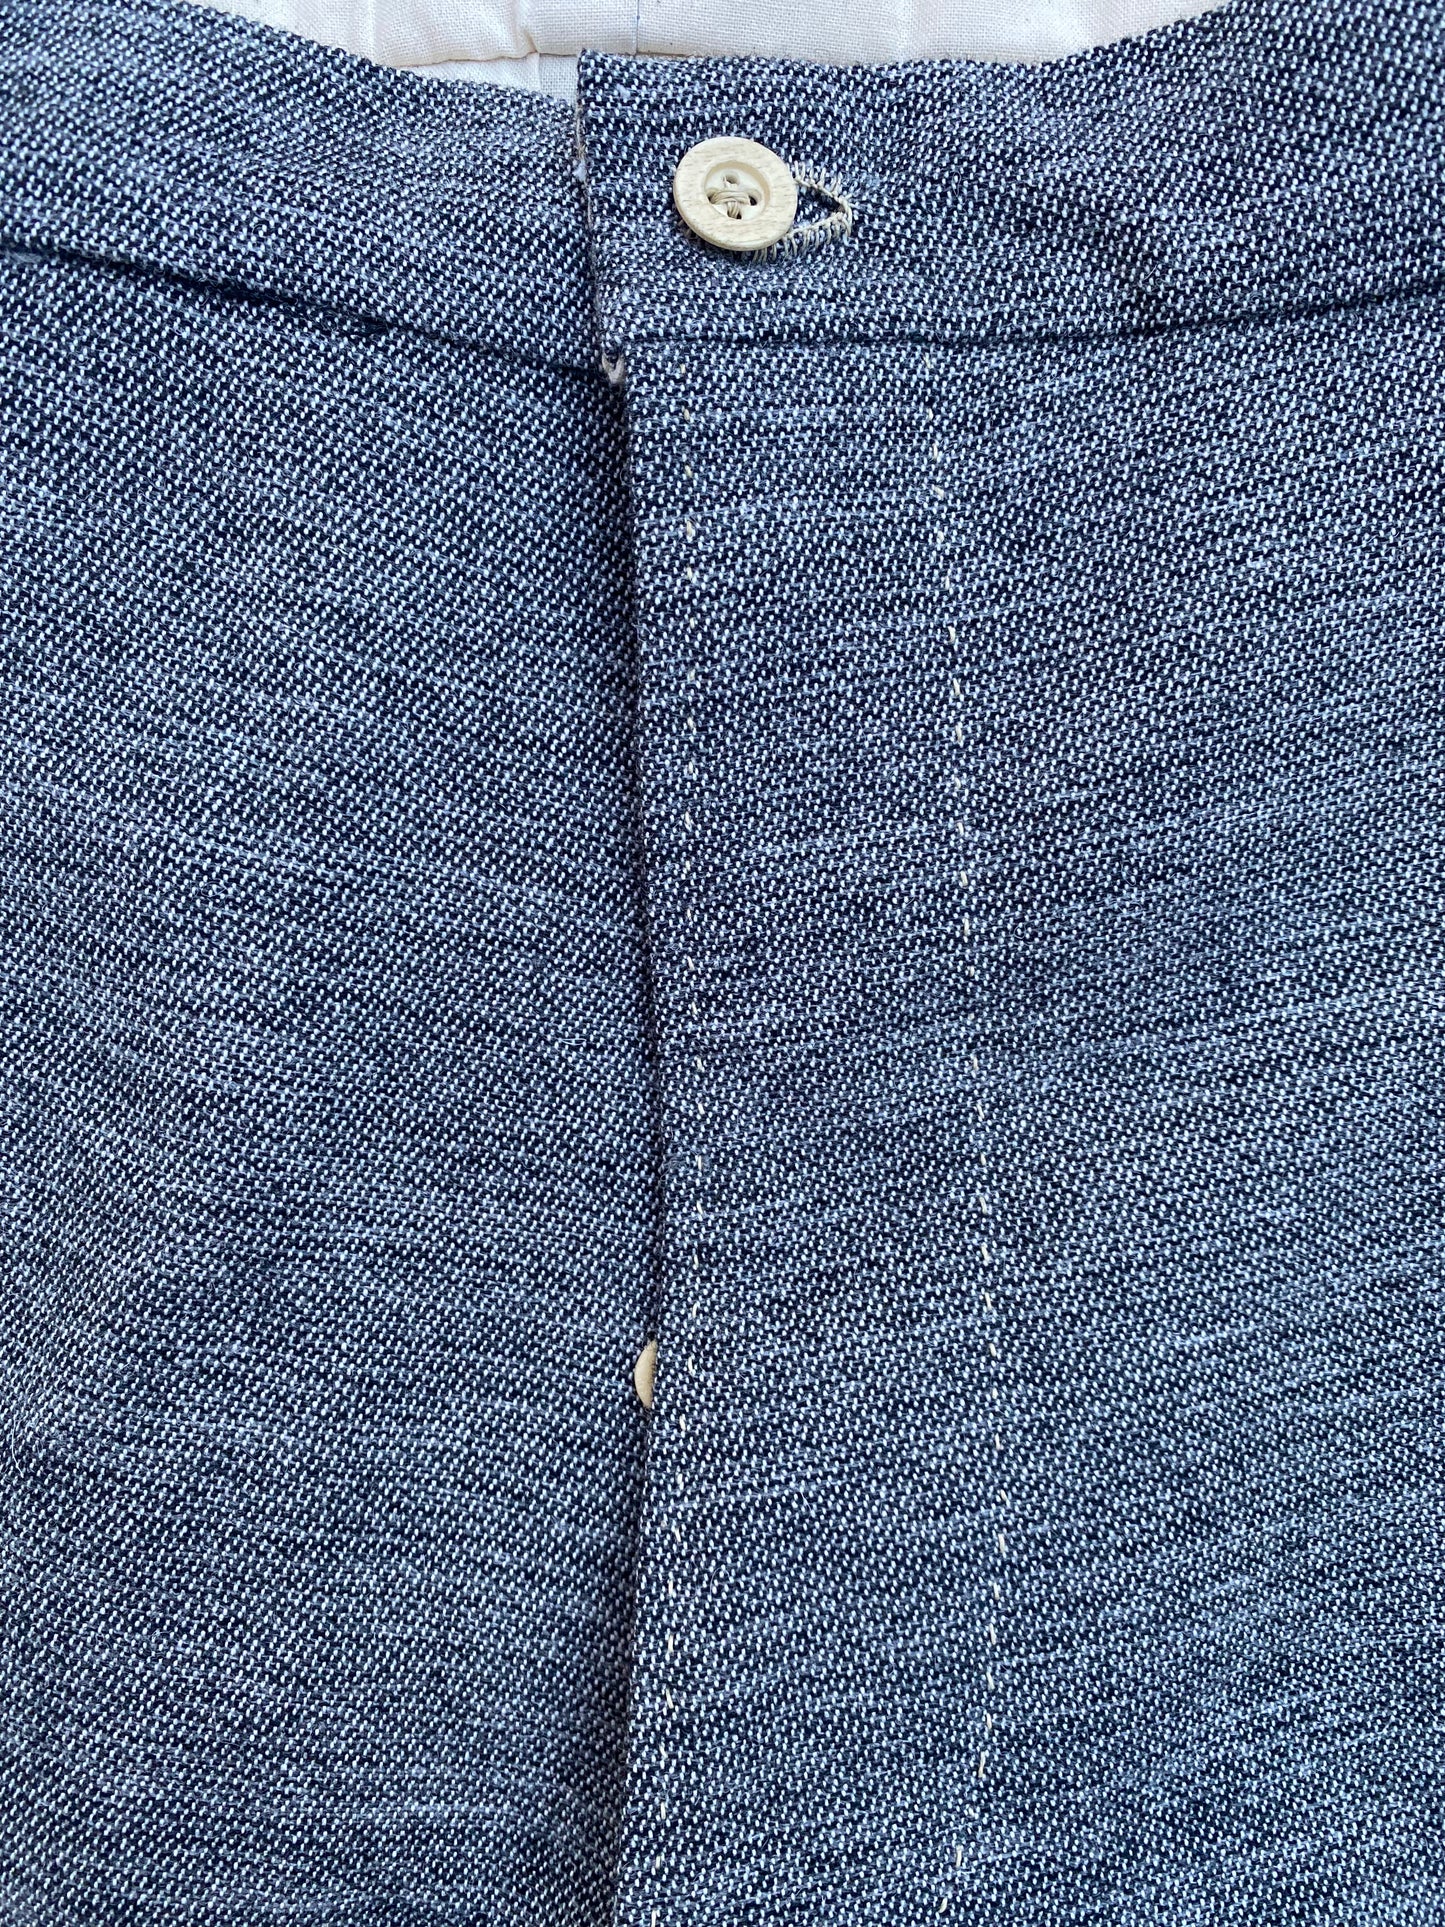 North Carolina State Issue Trousers – Beauregard's Tailor